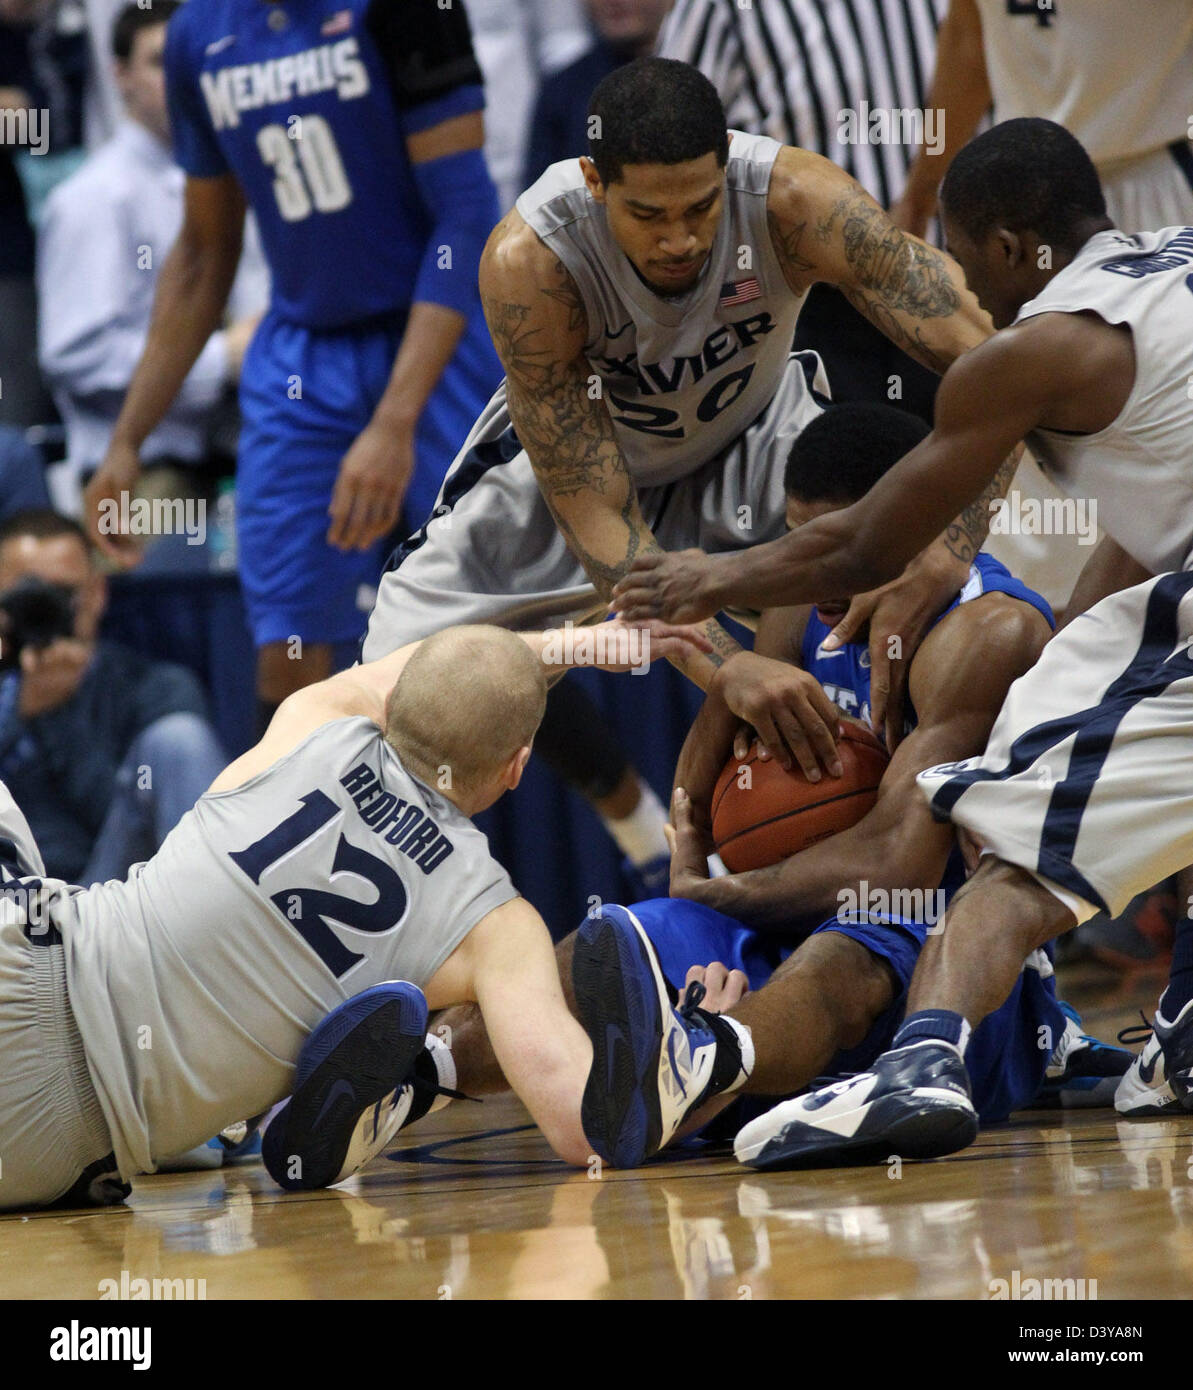 Cincinnati, Ohio, USA. 26th February 2013. Xavier Musketeers players Xavier Musketeers guard Brad Redford (12),Xavier Musketeers forward Justin Martin (20) and Xavier Musketeers forward Travis Taylor (4) try there best to take a ball away from Memphis Tigers guard Geron Johnson (55). In the second half of play on Tuesday, February 26, 2013. During play at the Cintas Center in Cincinnati,Ohio. (Credit Image: Credit:  Ernest Coleman/ZUMAPRESS. com/Alamy Live News) Stock Photo